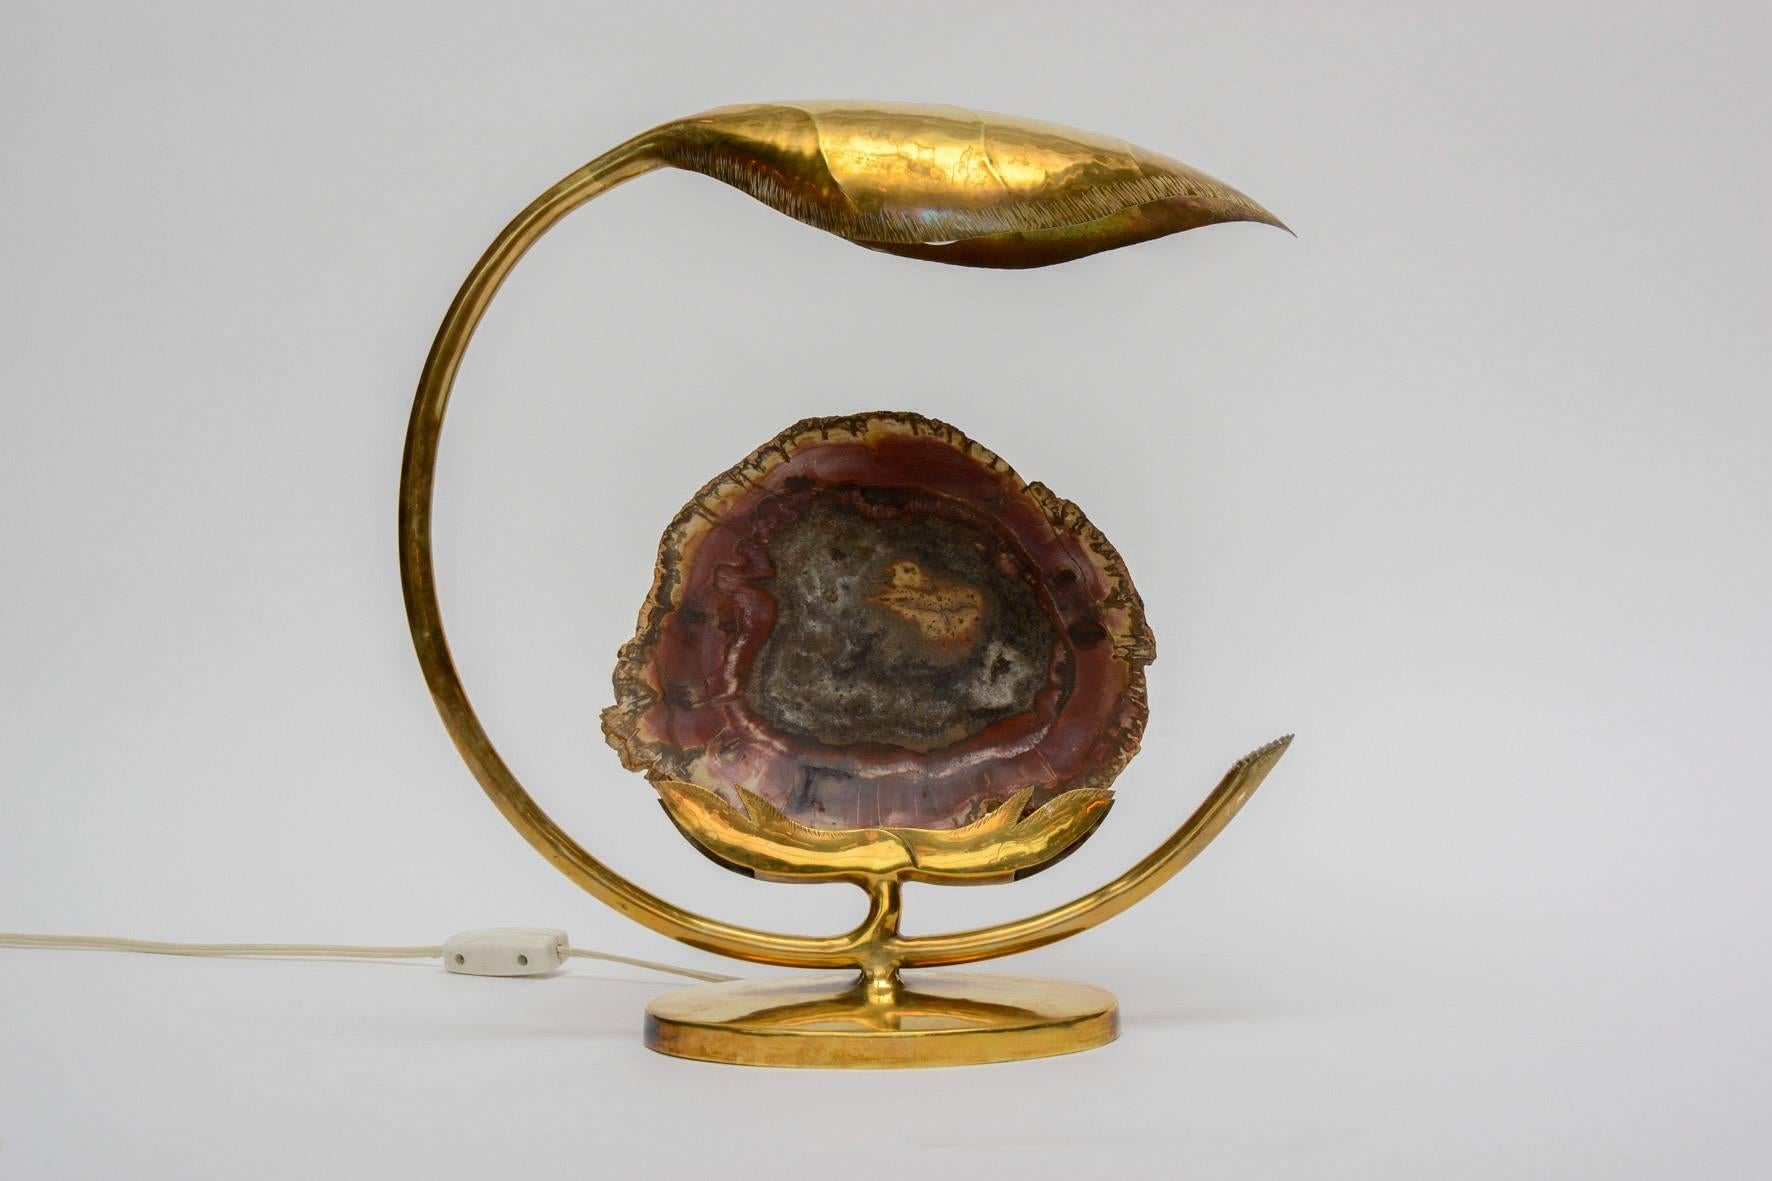 Sculptural table lamp made by the French artist Henri Fernandez in the 1970s.

Slice of polished petrified wood set in brass with a round leaf hiding the bulb.